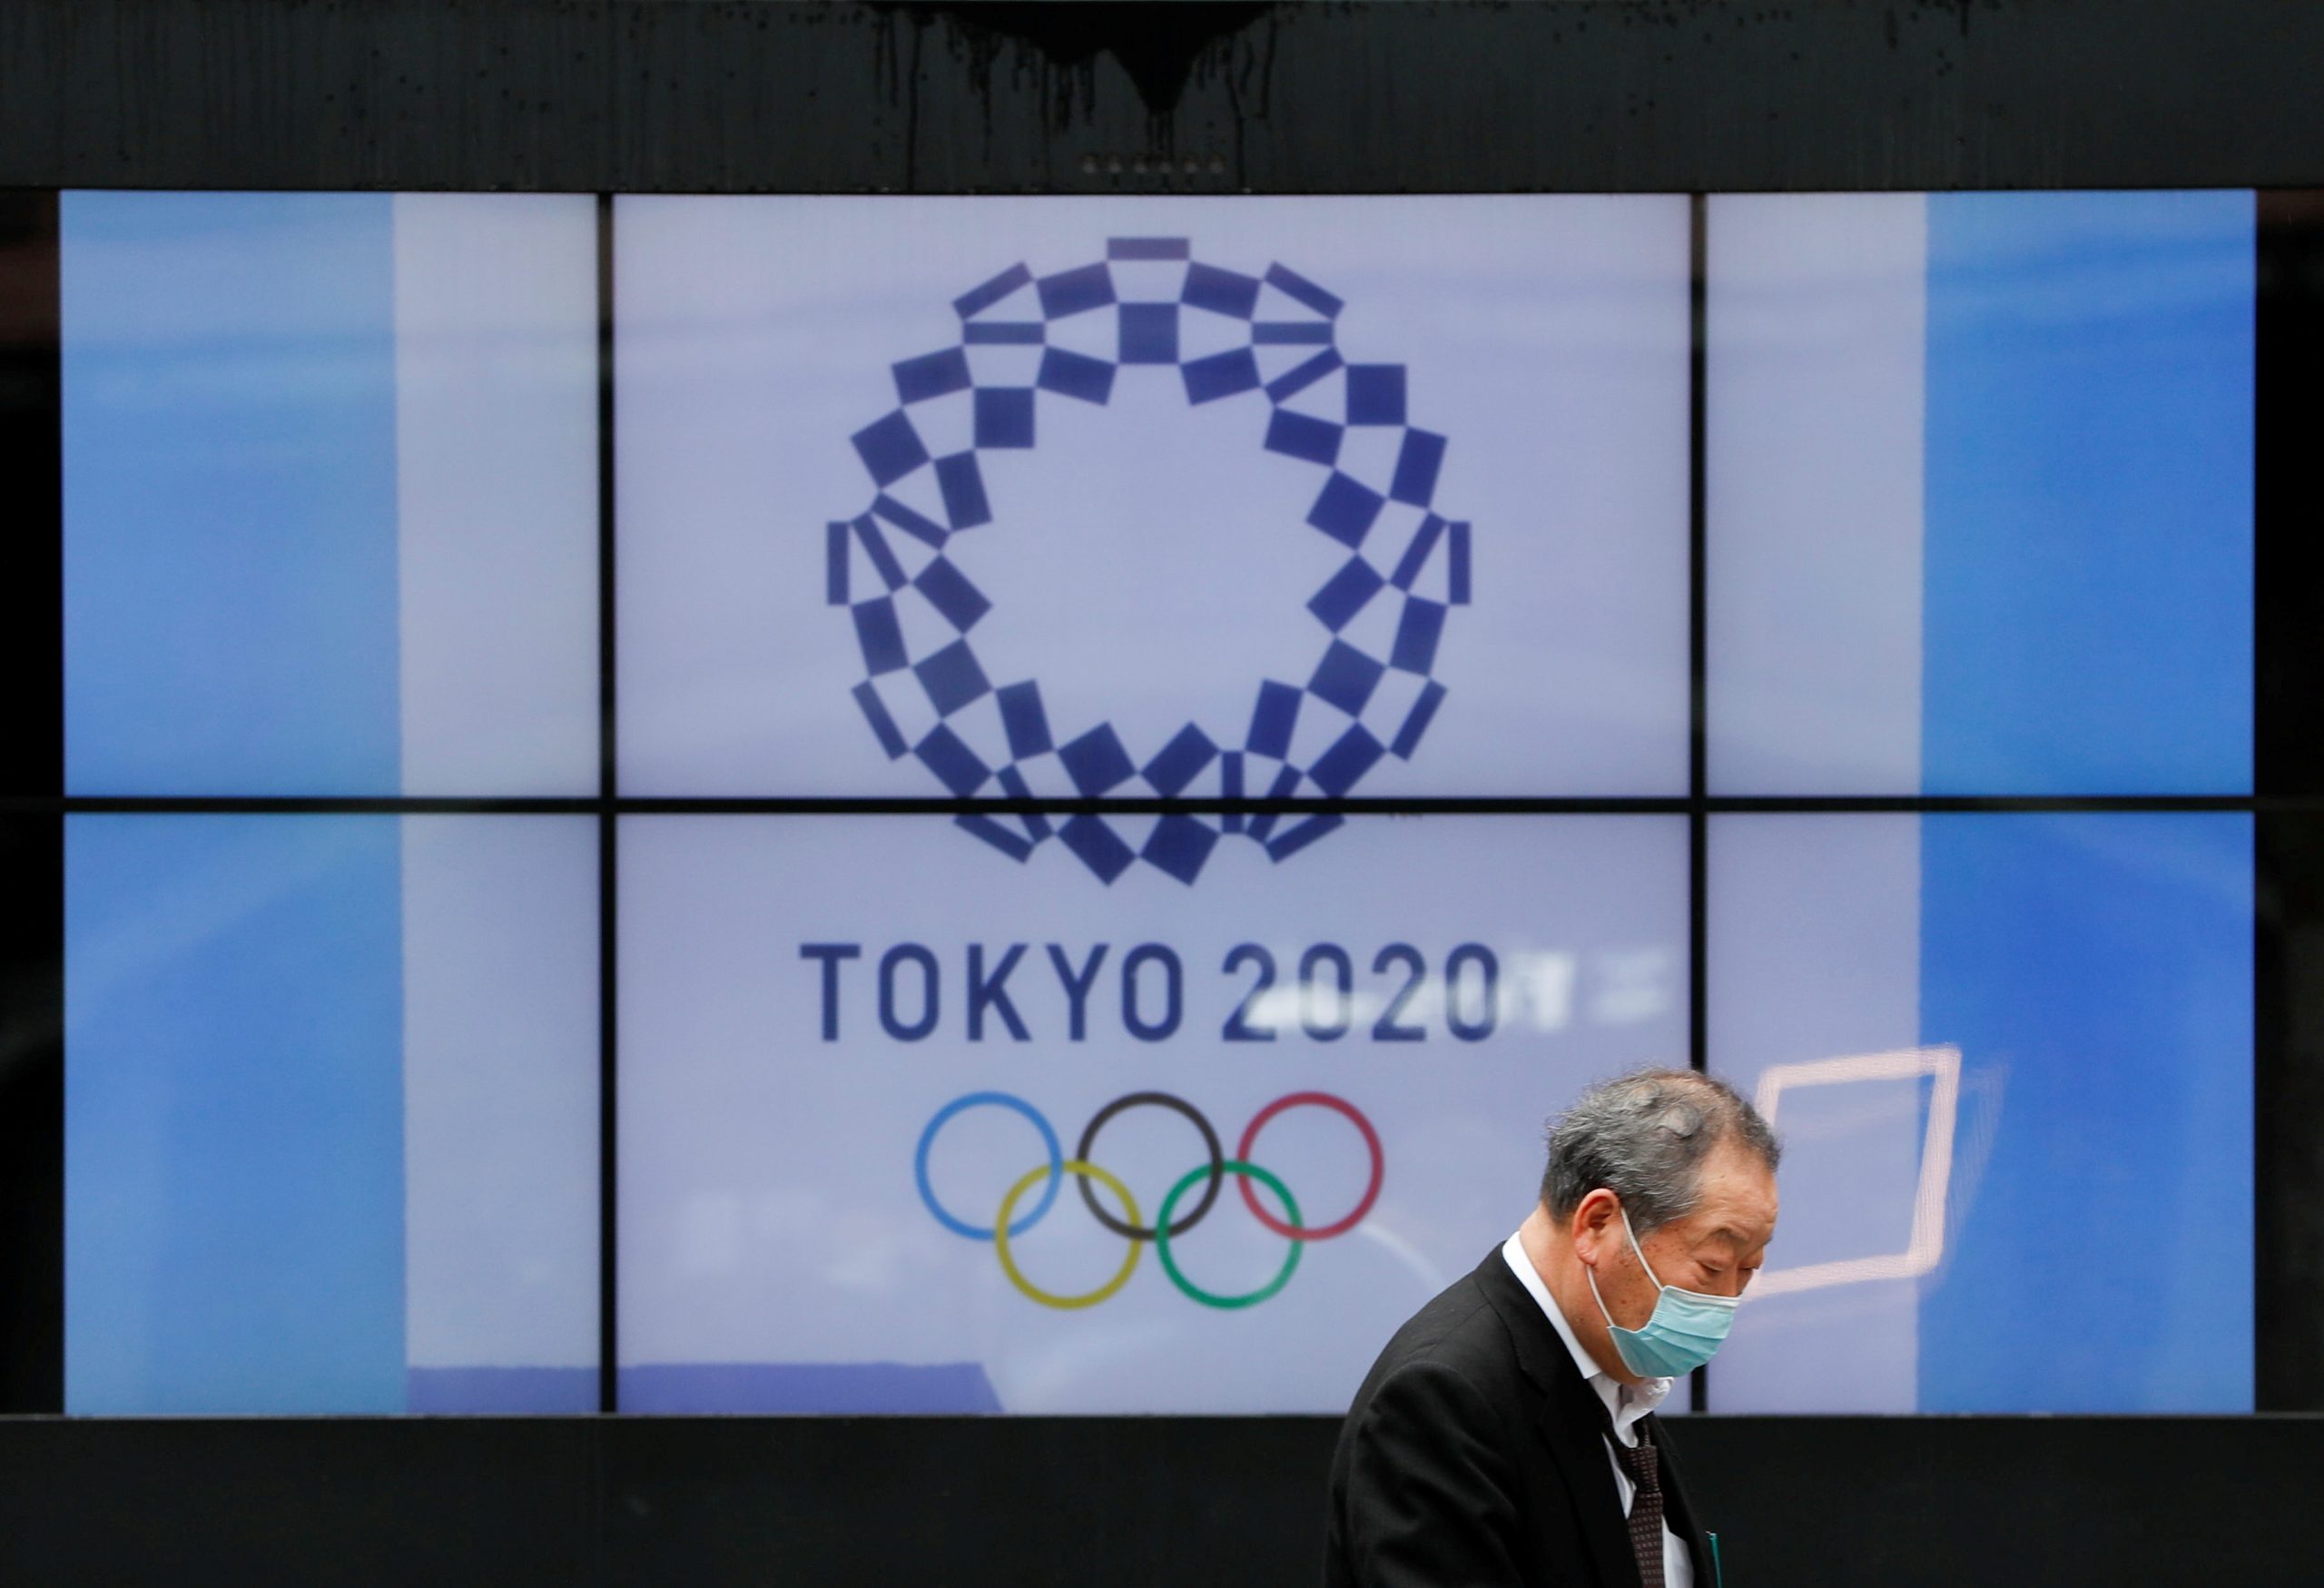 Domestic support for Olympic Games rises, poll indicates